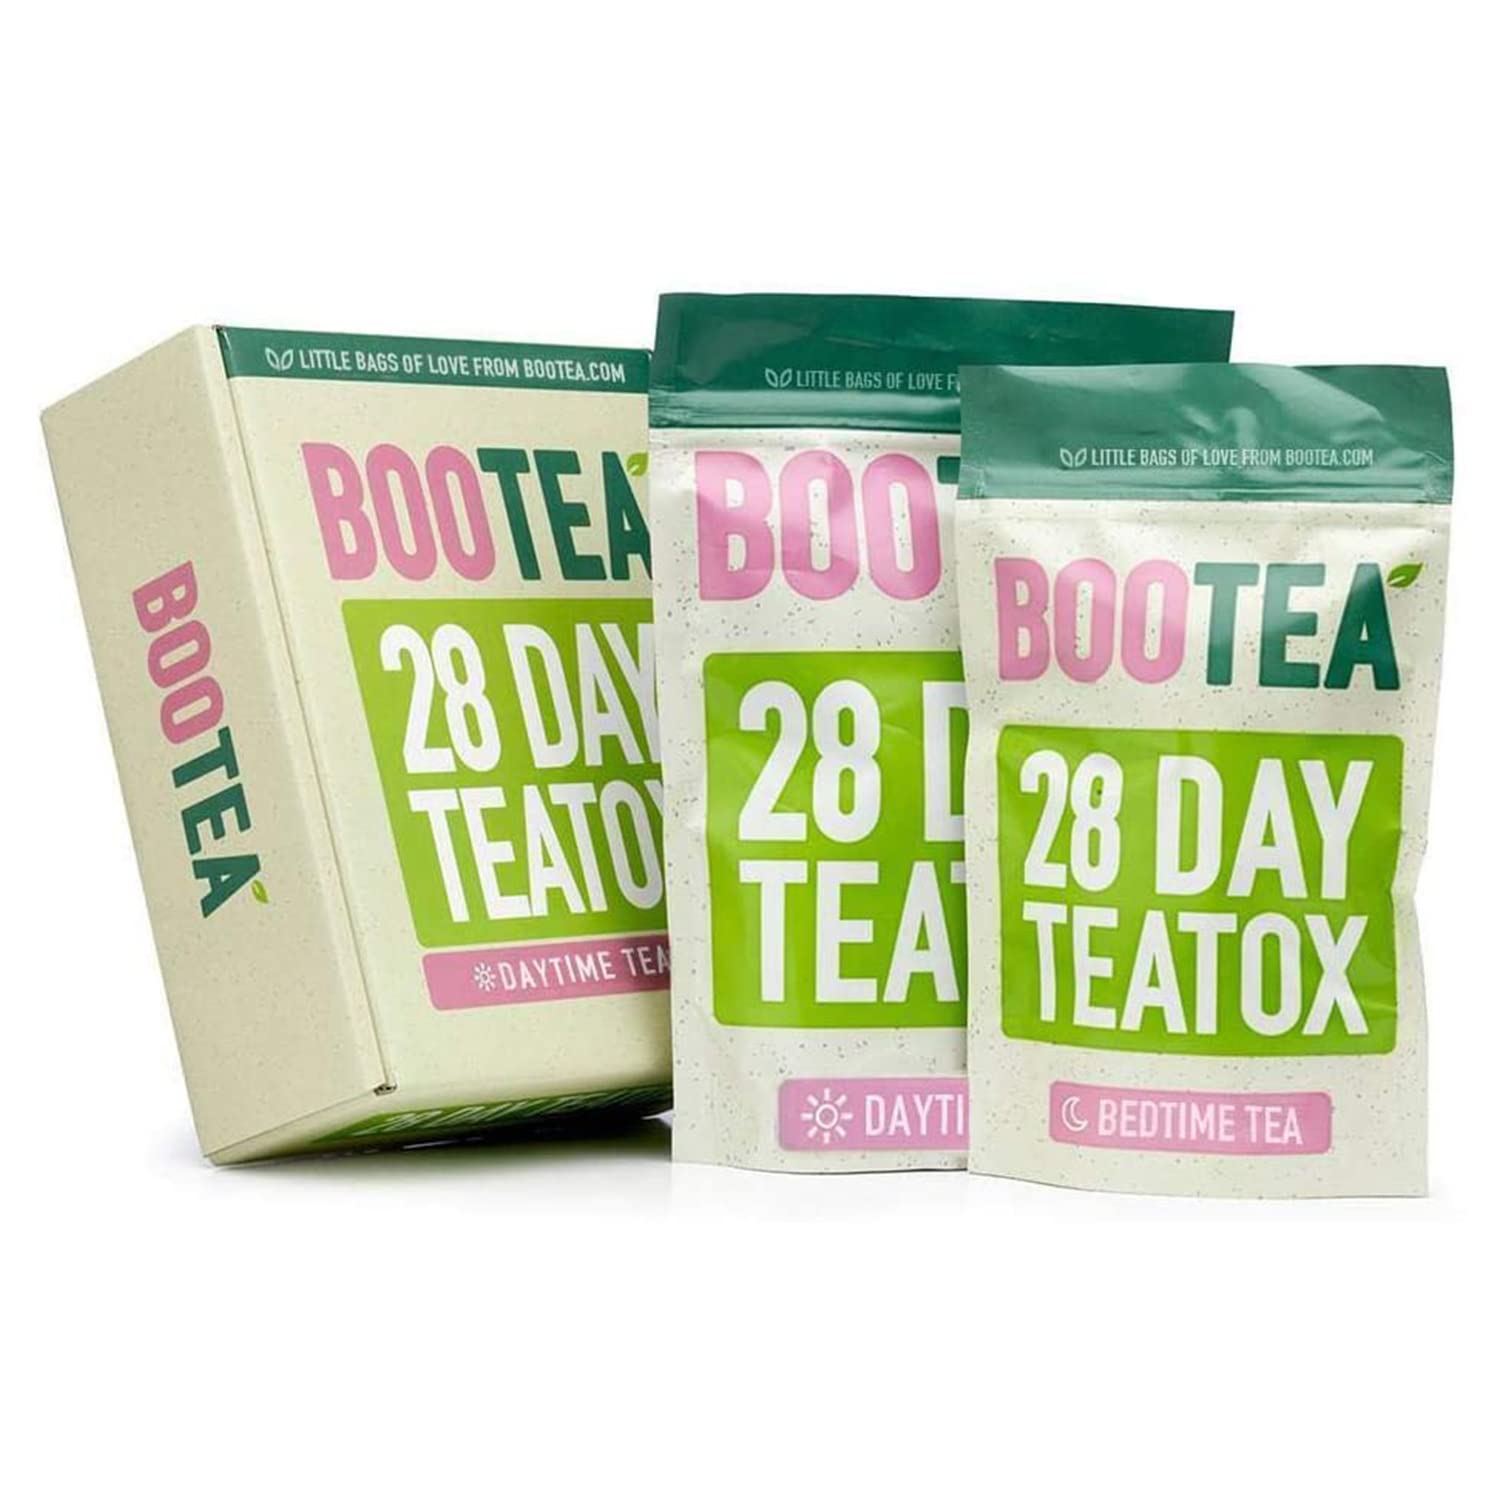 Bootea Detox Tea for Weight Management| Fast 28 Day Tea Tox | Day and Night Tea, Energy Booster and Sleep Support with Proven Benefits | Made in The UK